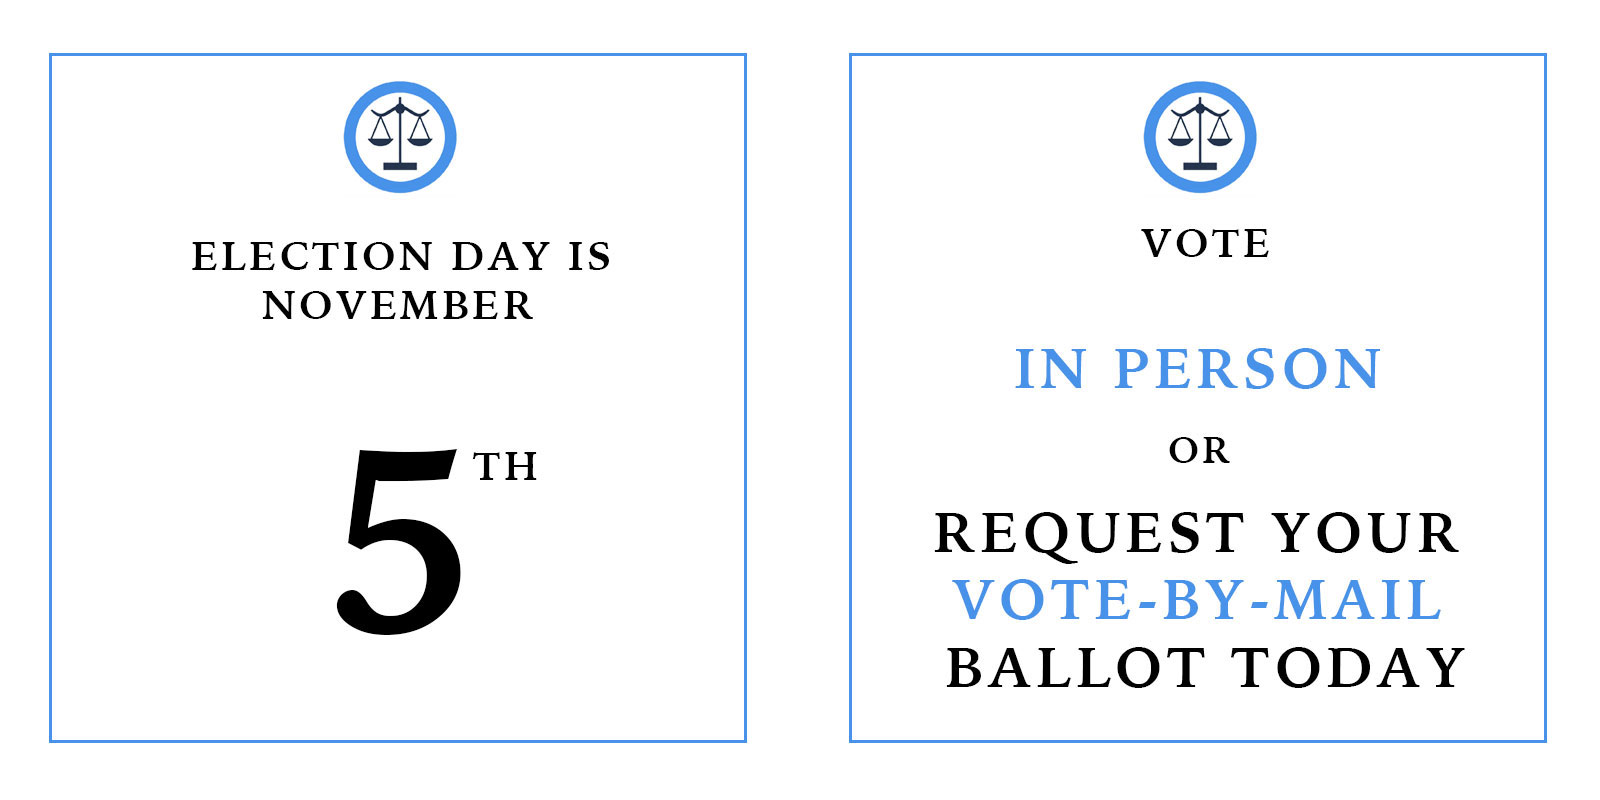 Election Day Information: November 5th. Vote In Person or Request Your Vote-By-Mail Ballot Today